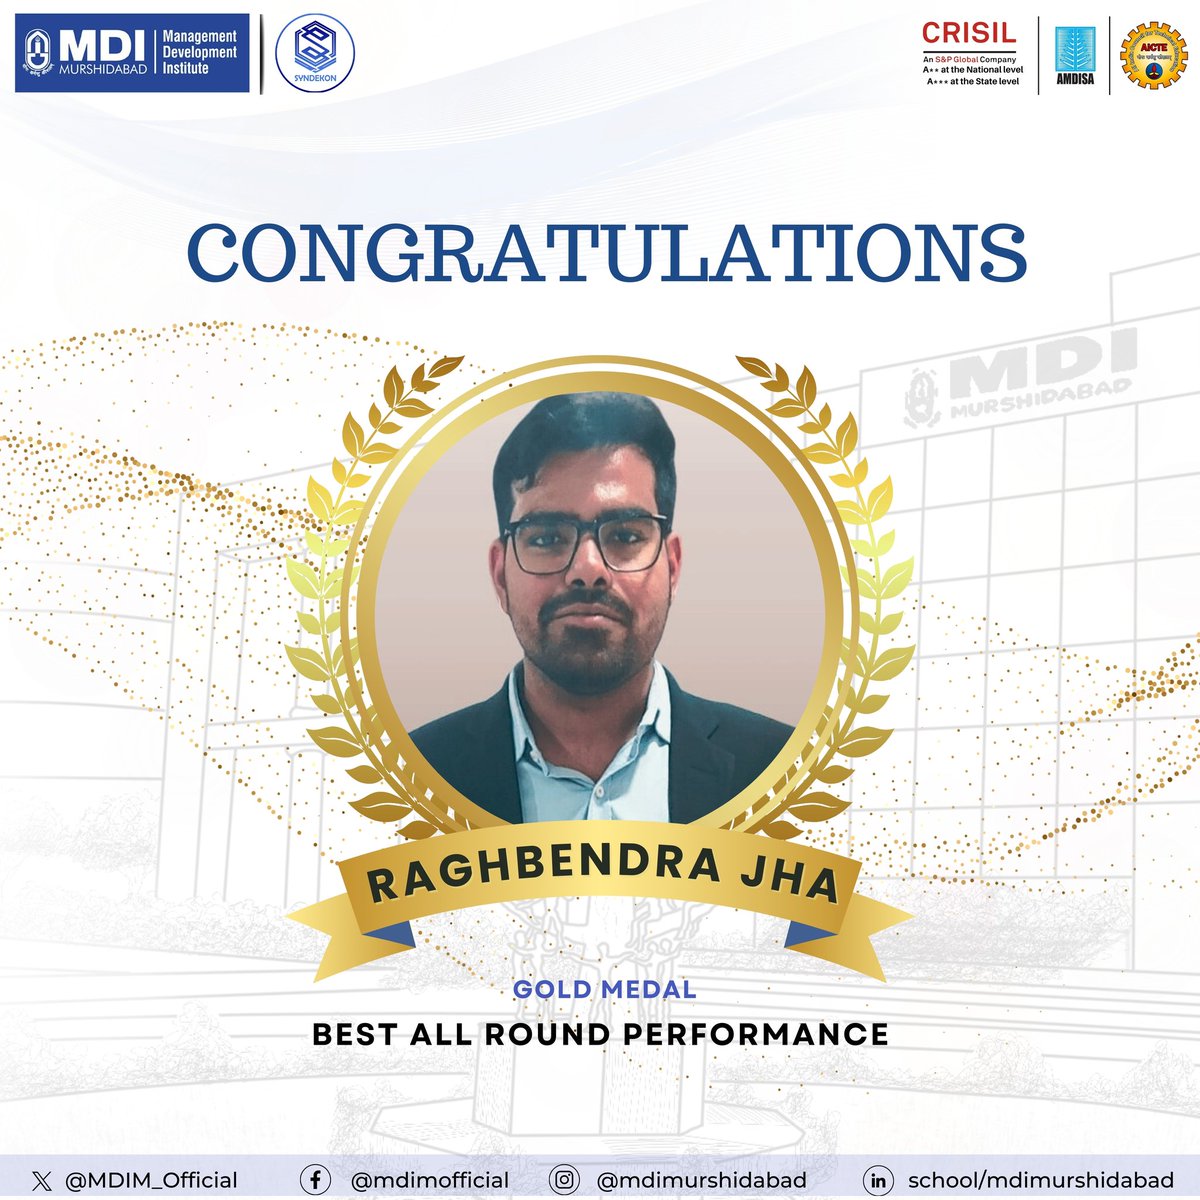 The #MDIM community is elated to formally recognize the extraordinary accomplishments of Mr. Raghbendra Jha, our deserving laureate of the Gold Medal for the Best All-Round Performance from the class of 2022-24. #MBA #MDI #Management